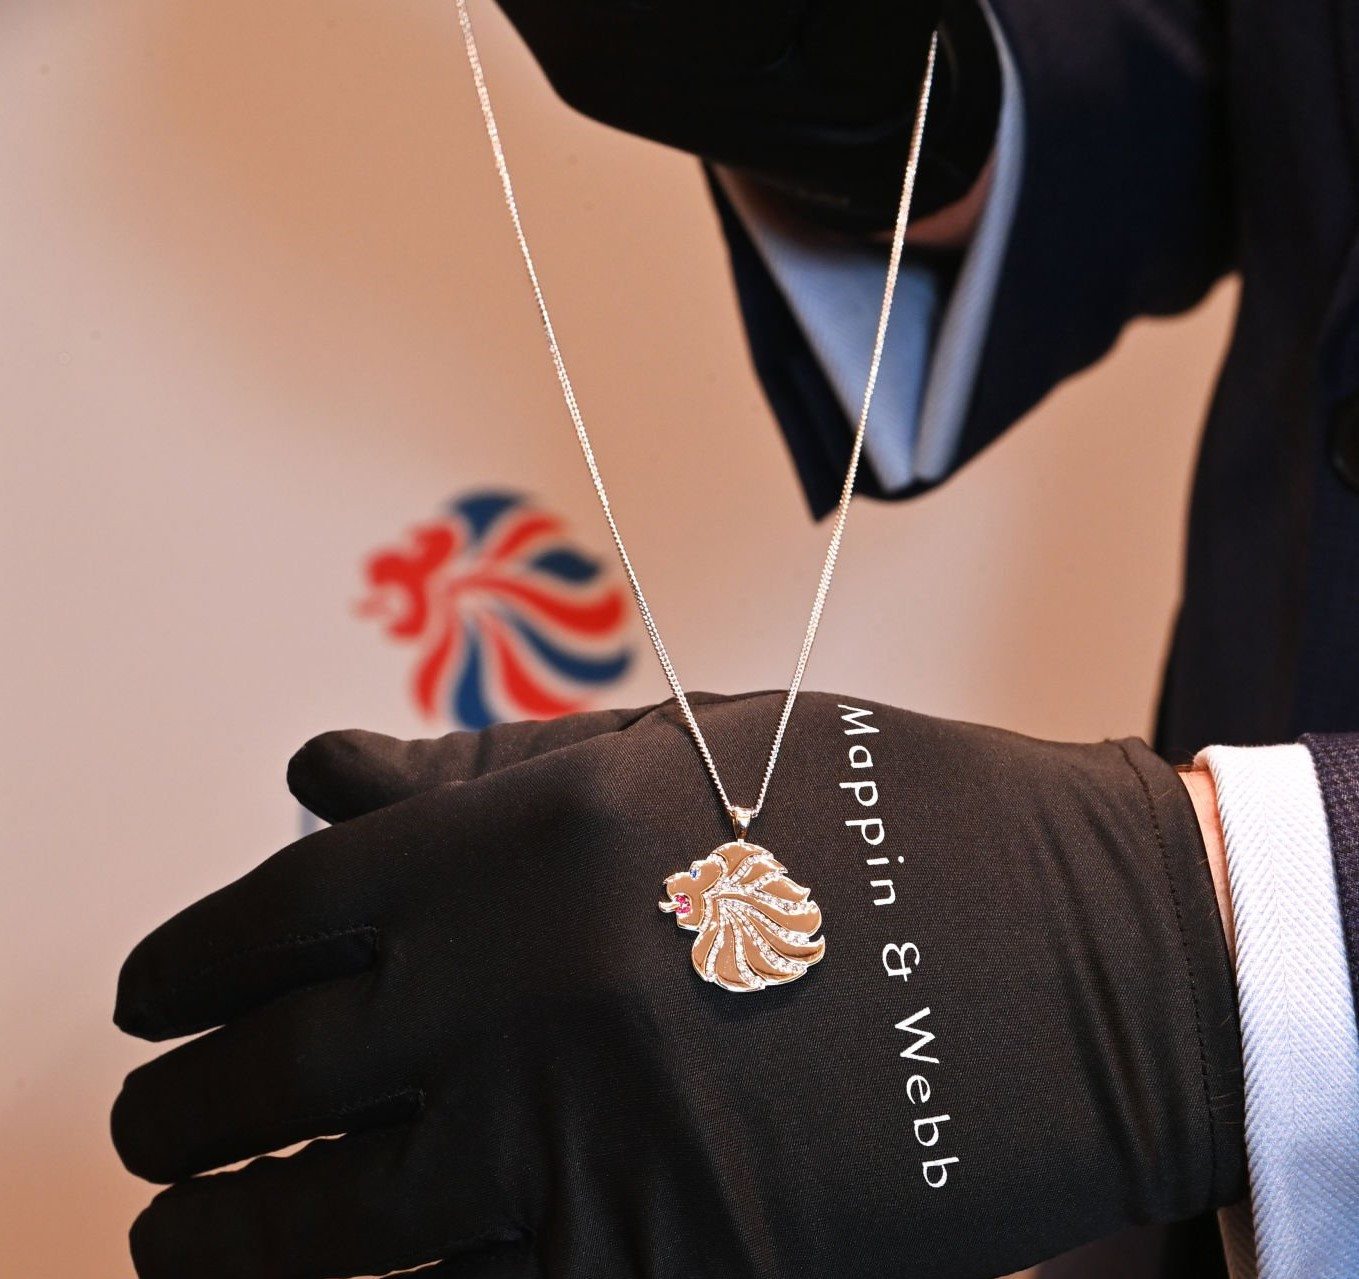 The products created by Mappin & Webb are due to be available for sale from October 16 ©Team GB